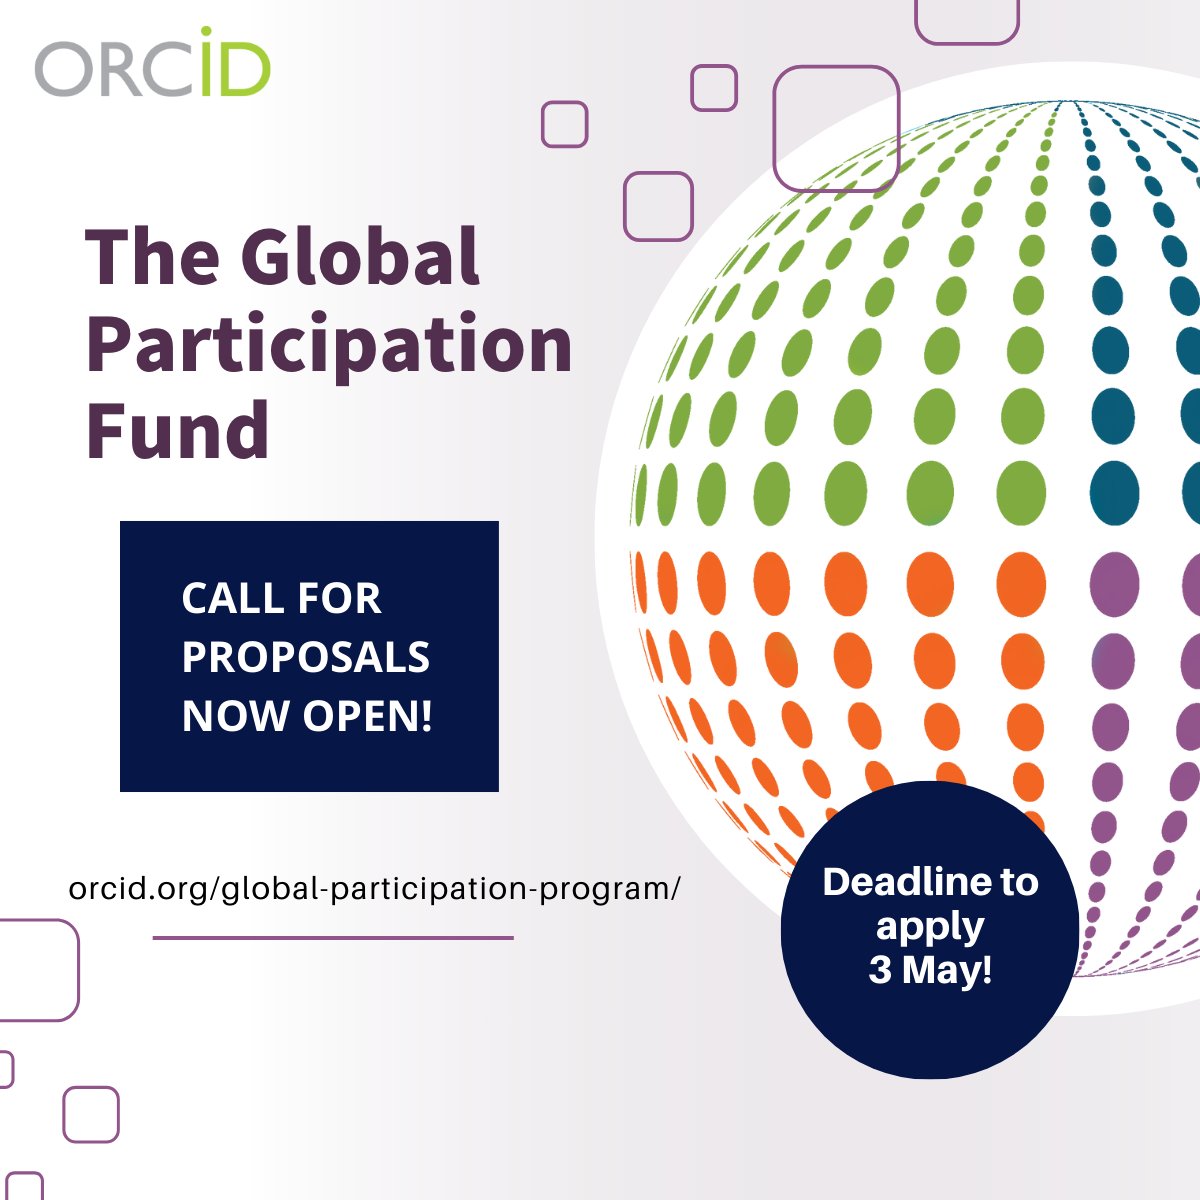 Our Global Participation Fund exists to provide funding to improve understanding and encourage uptake of ORCID in under-represented countries in the Global South. Applications accepted through 3 May! Catch our recent awardee showcase, FAQs, and more ➡️ bit.ly/3Tr9TaI